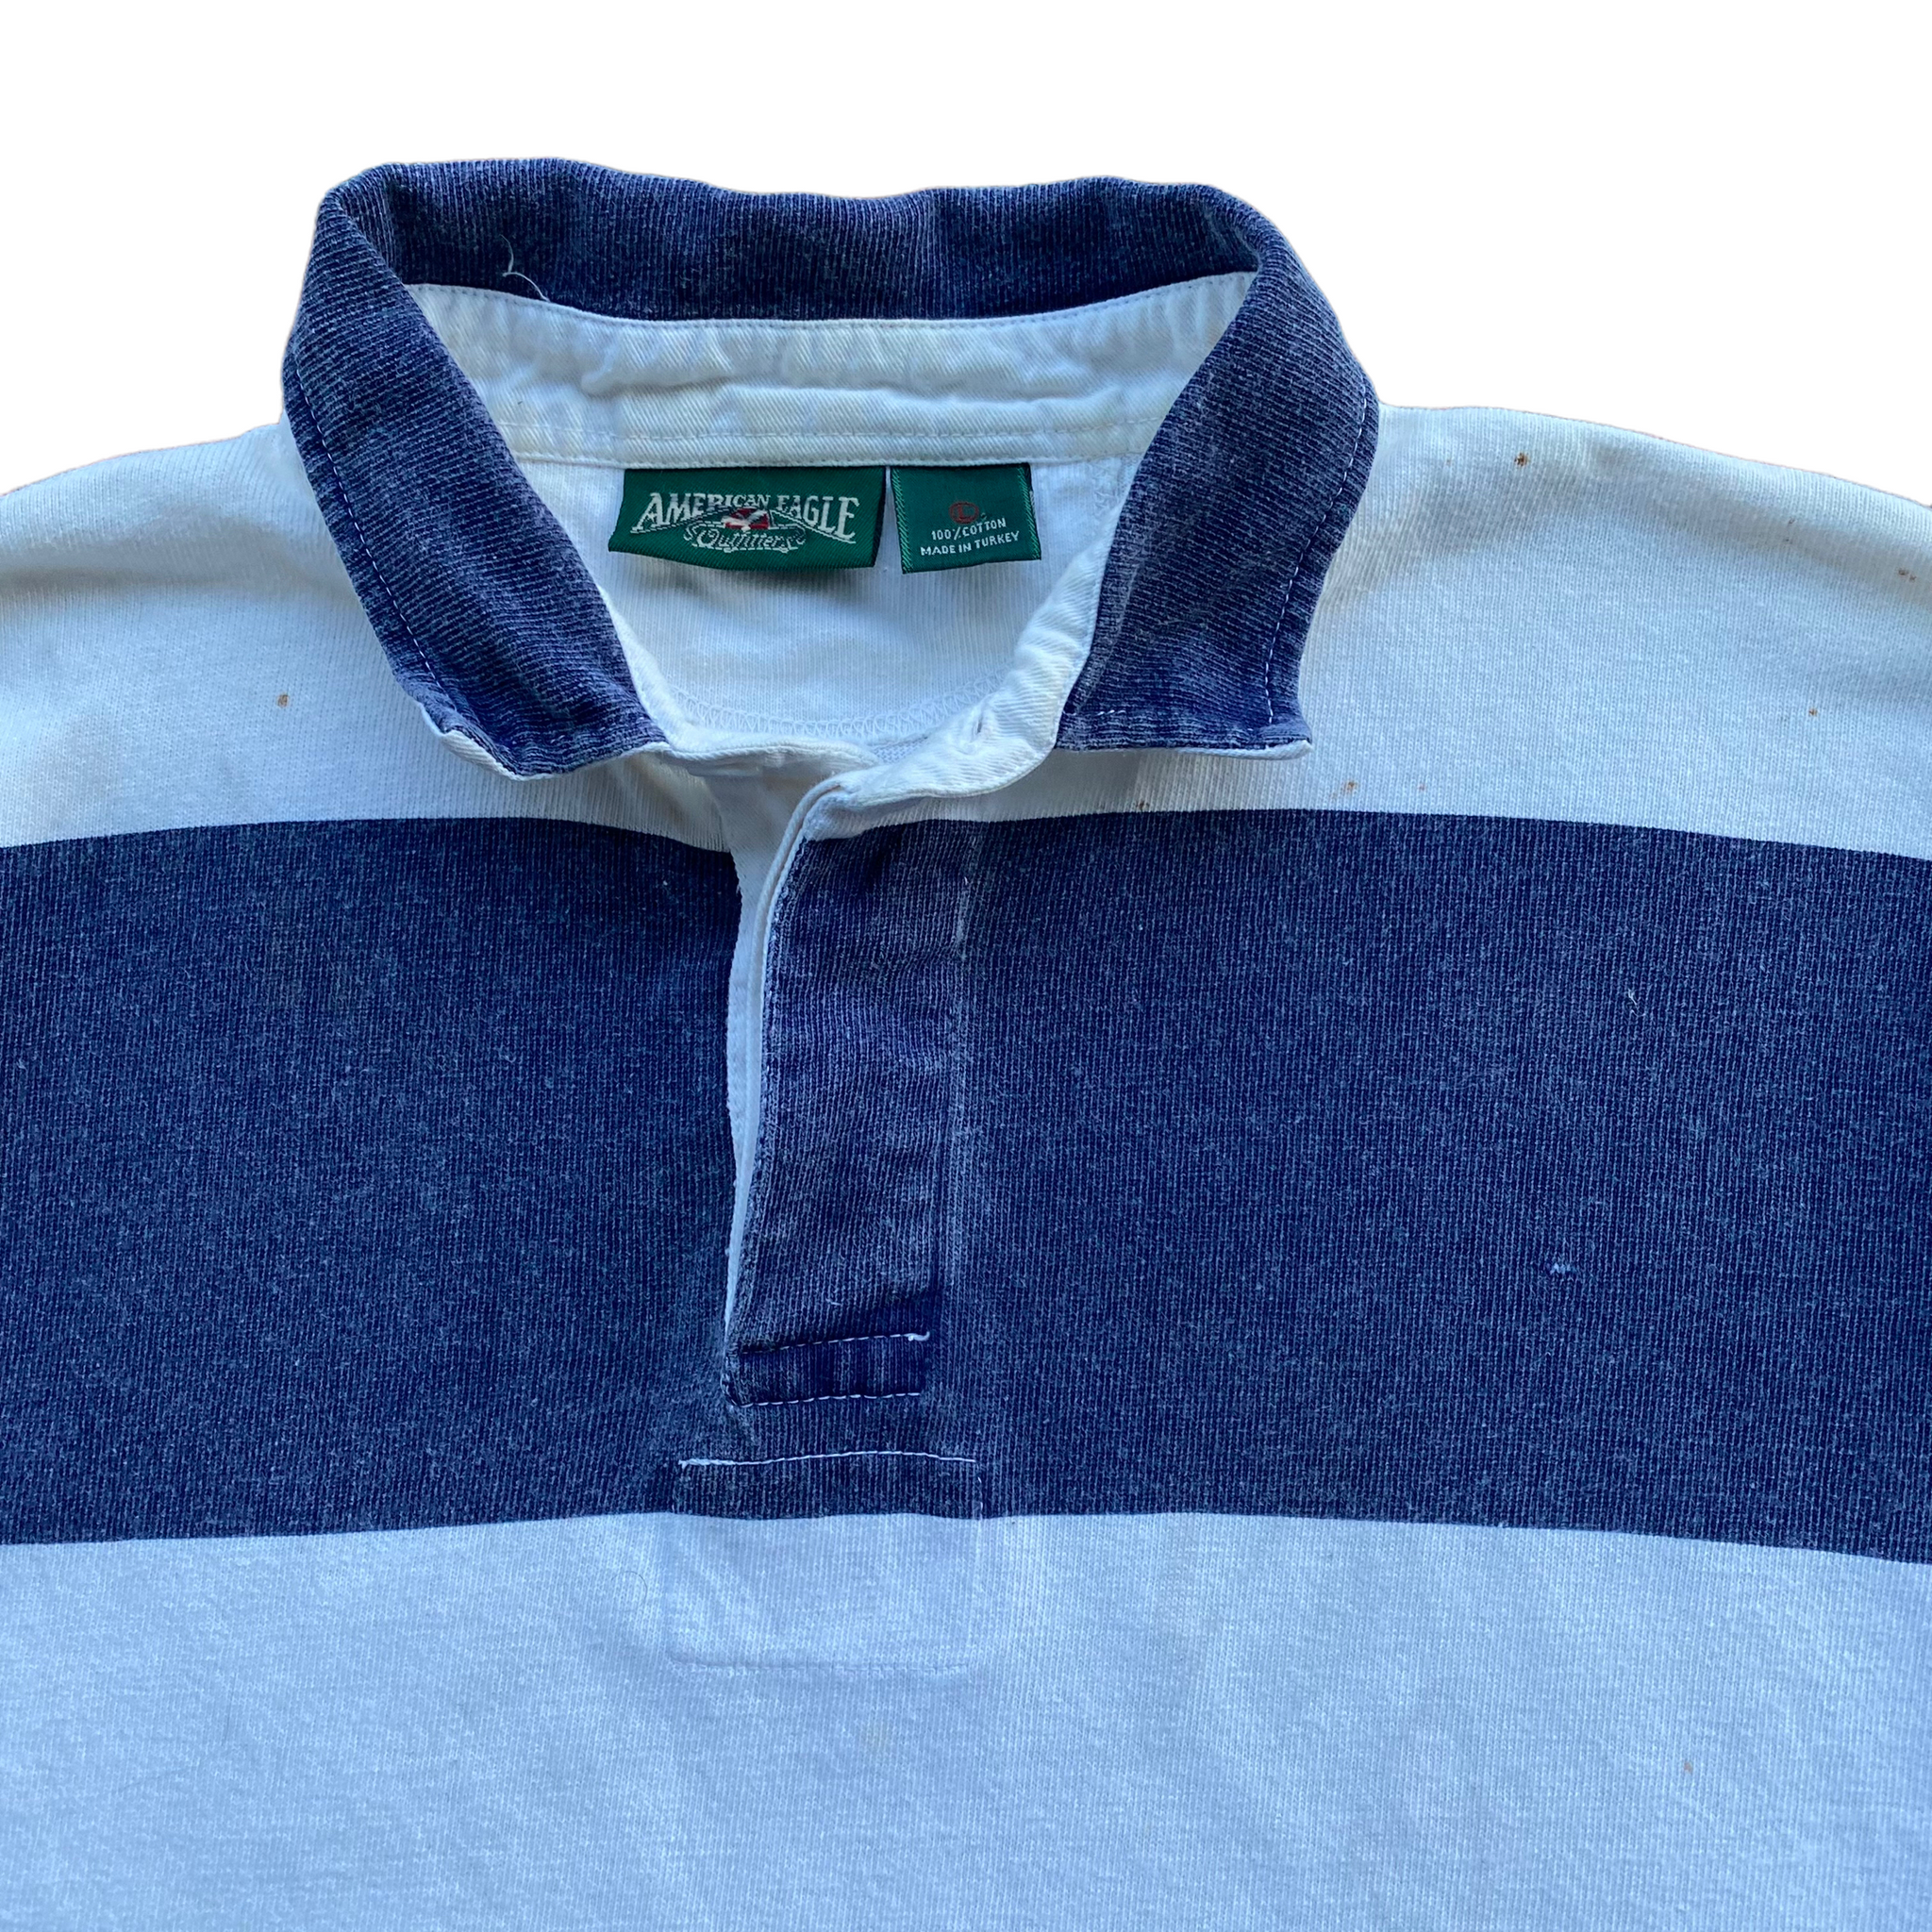 90s American eagle rugby large